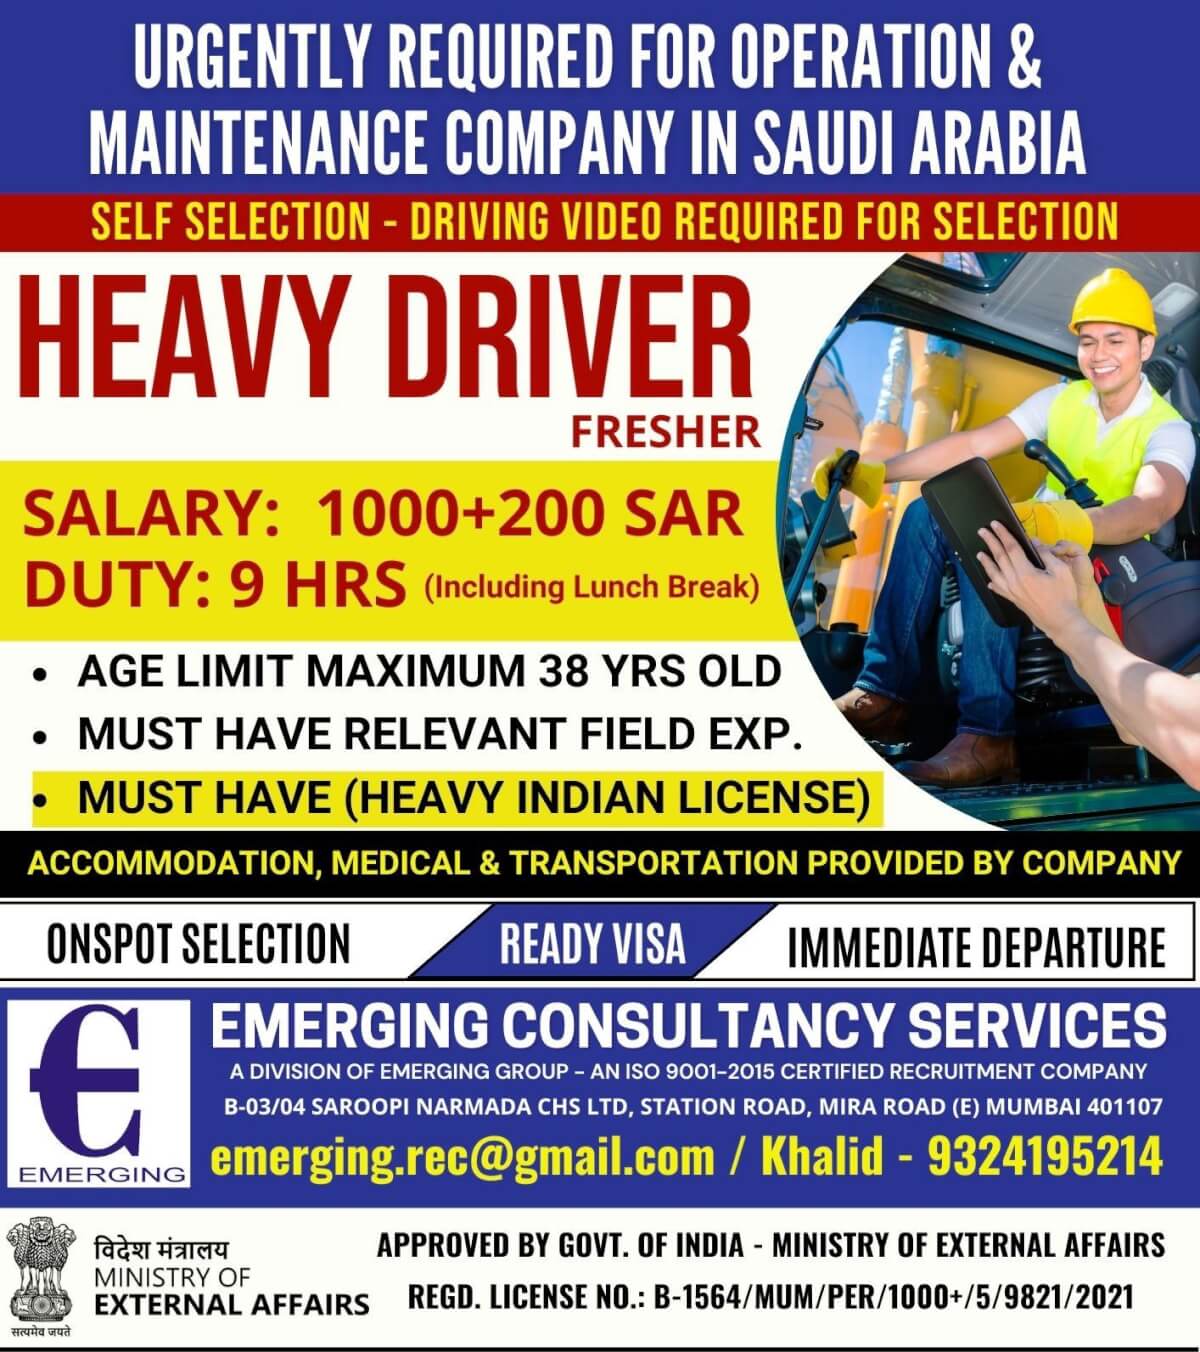 WE ARE HIRING FRESHER HEAVY DRIVER HAVING INDIAN HEAVY LICENSE.